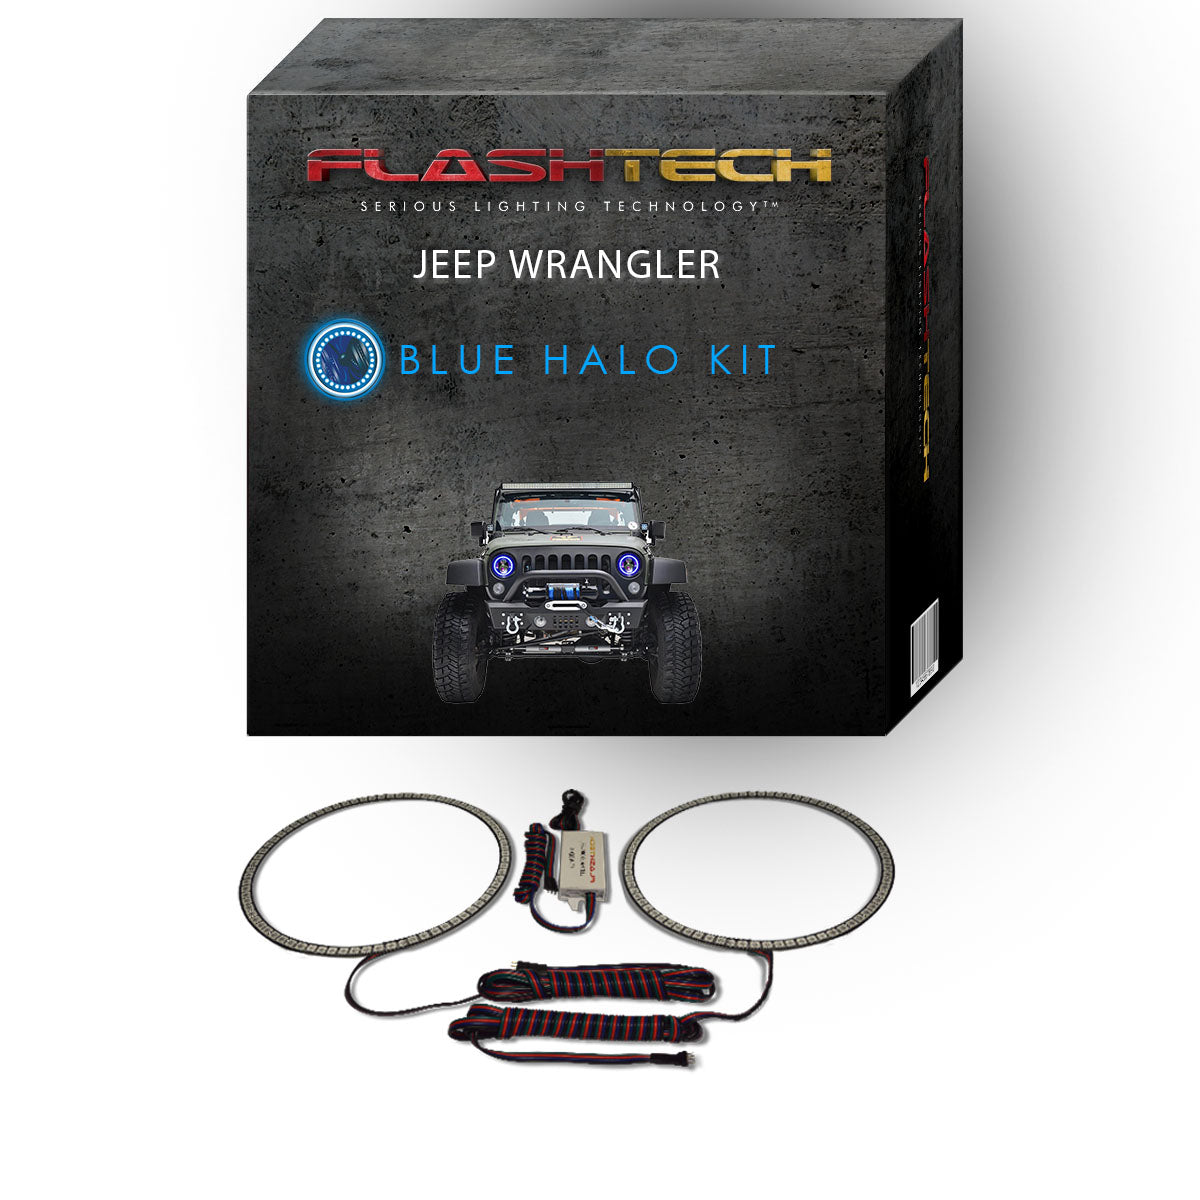 Jeep-Wrangler-2007-2008-2009-2010-2011-2012-2013-2014-2015-2016-2017-LED-Halo-Headlights-Blue-No-Remote-7inch-LEDprojector-BH